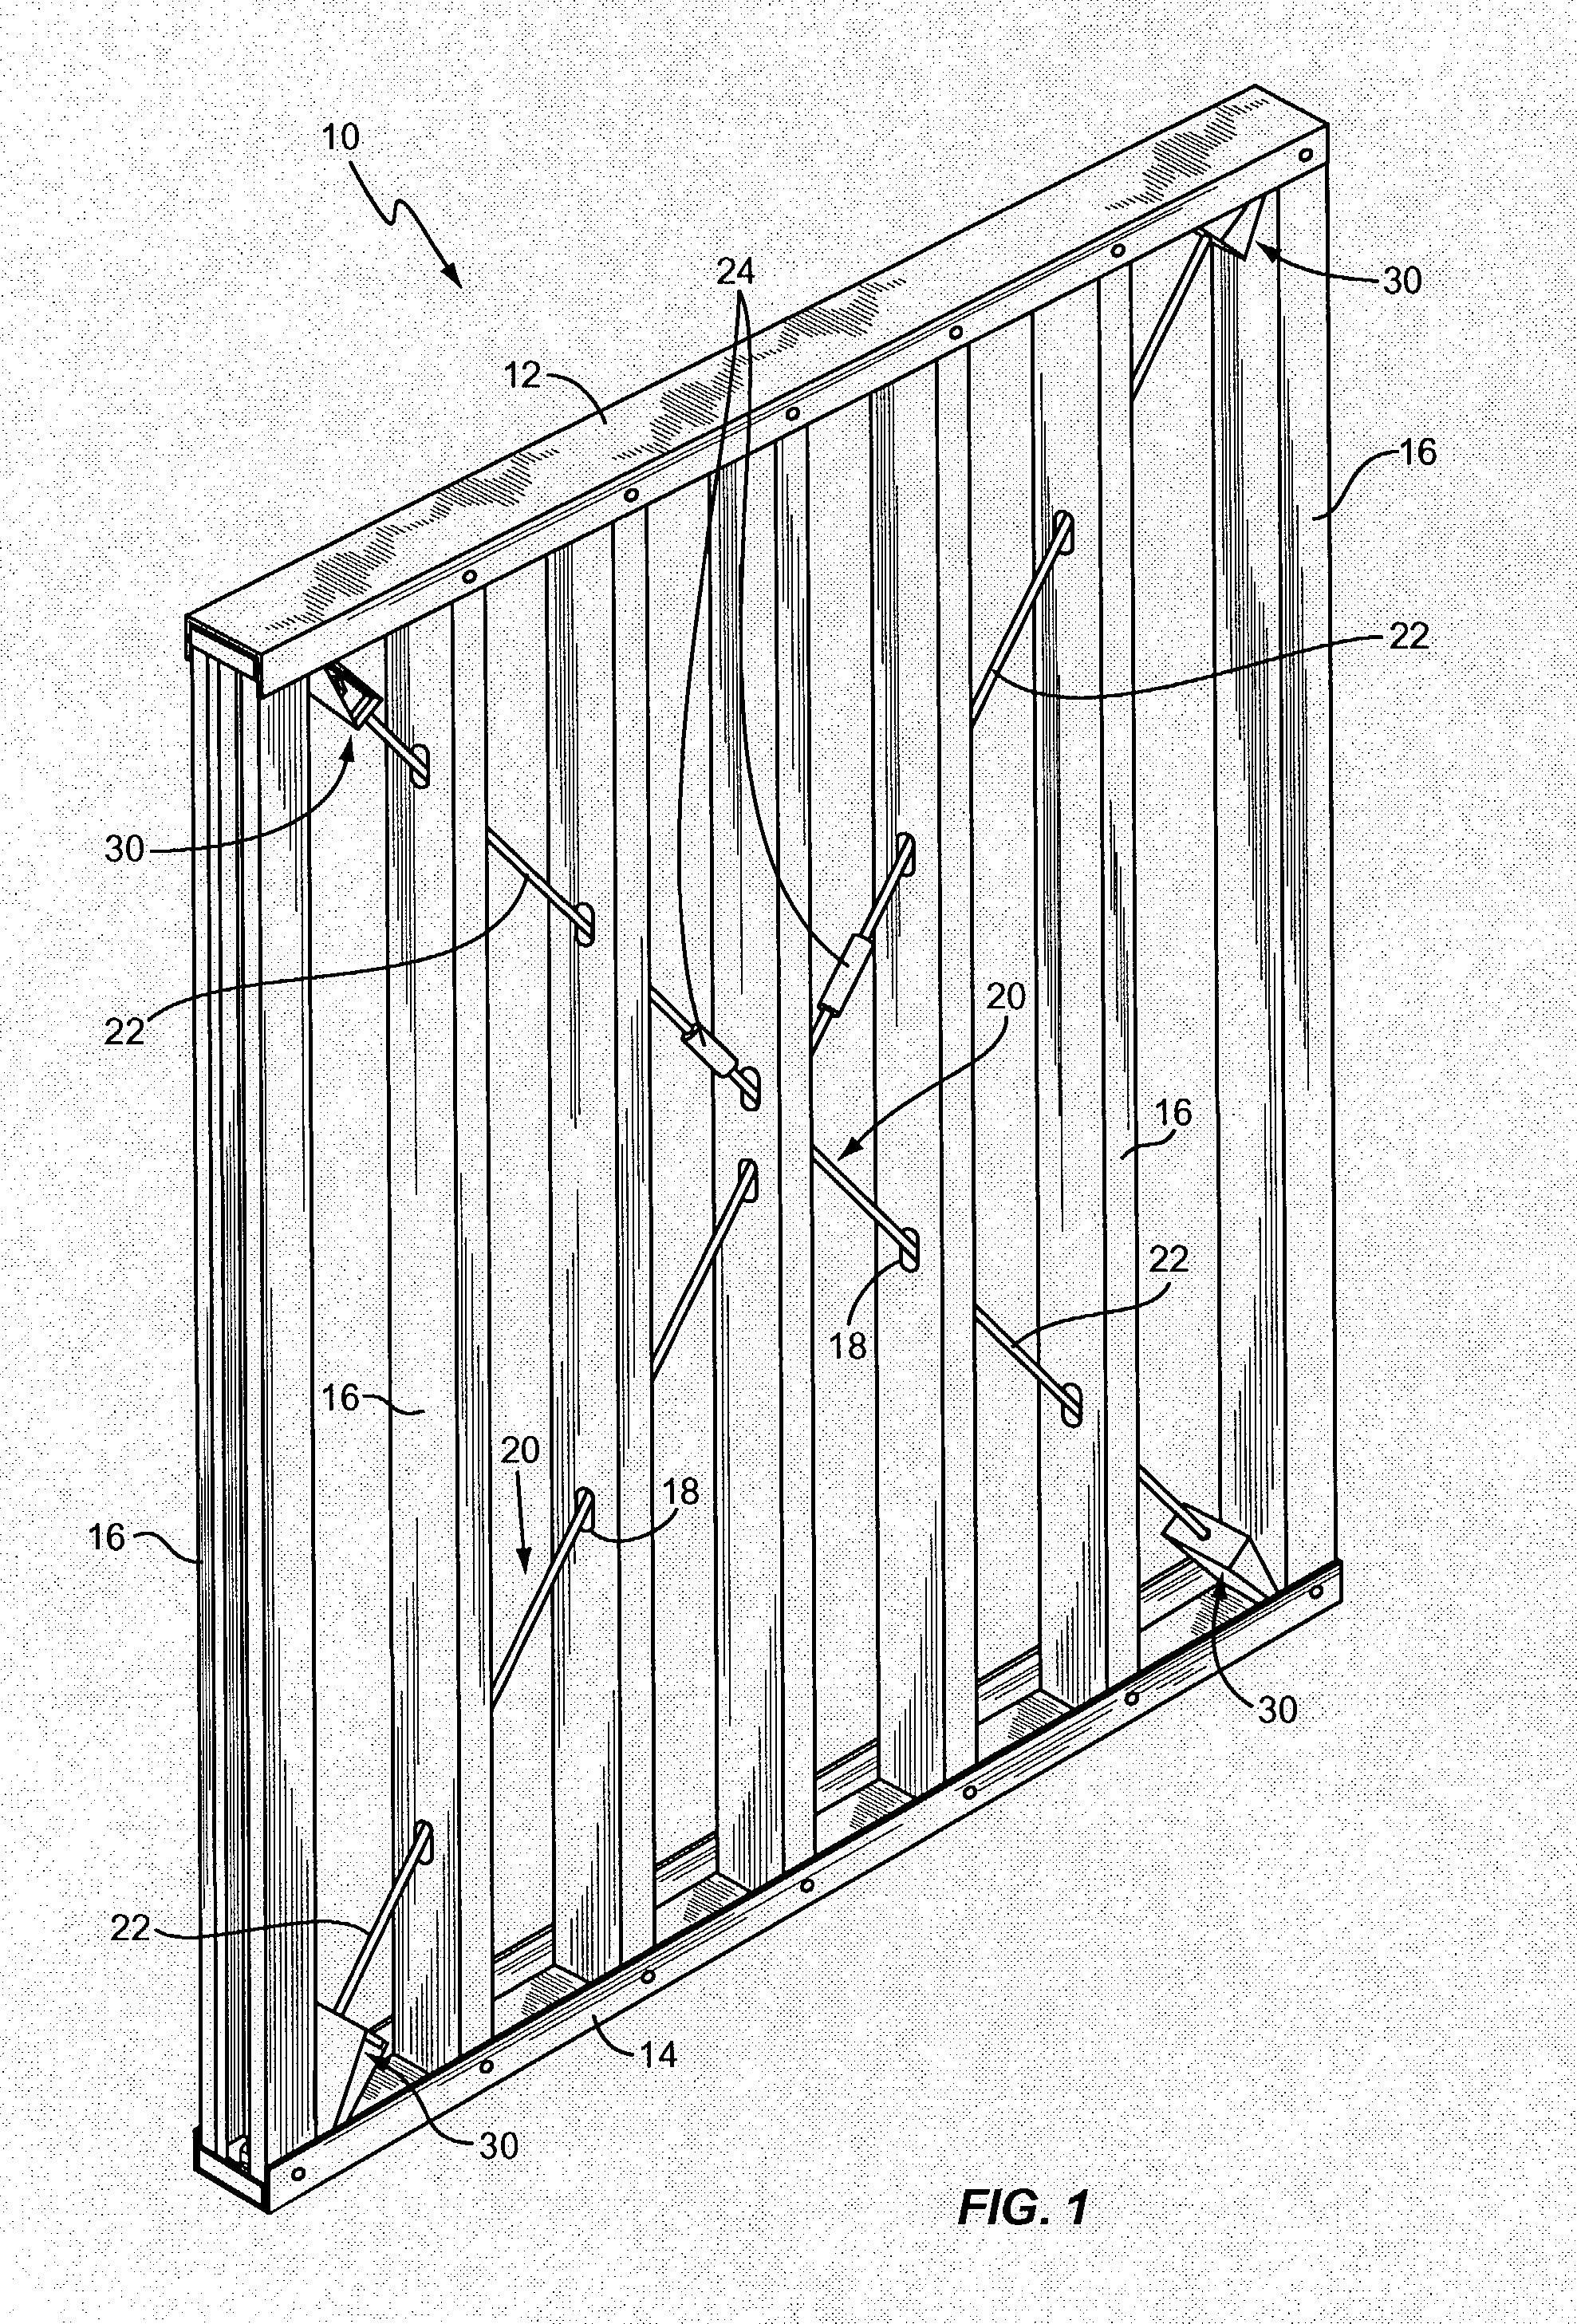 Wall structure with corner connectors